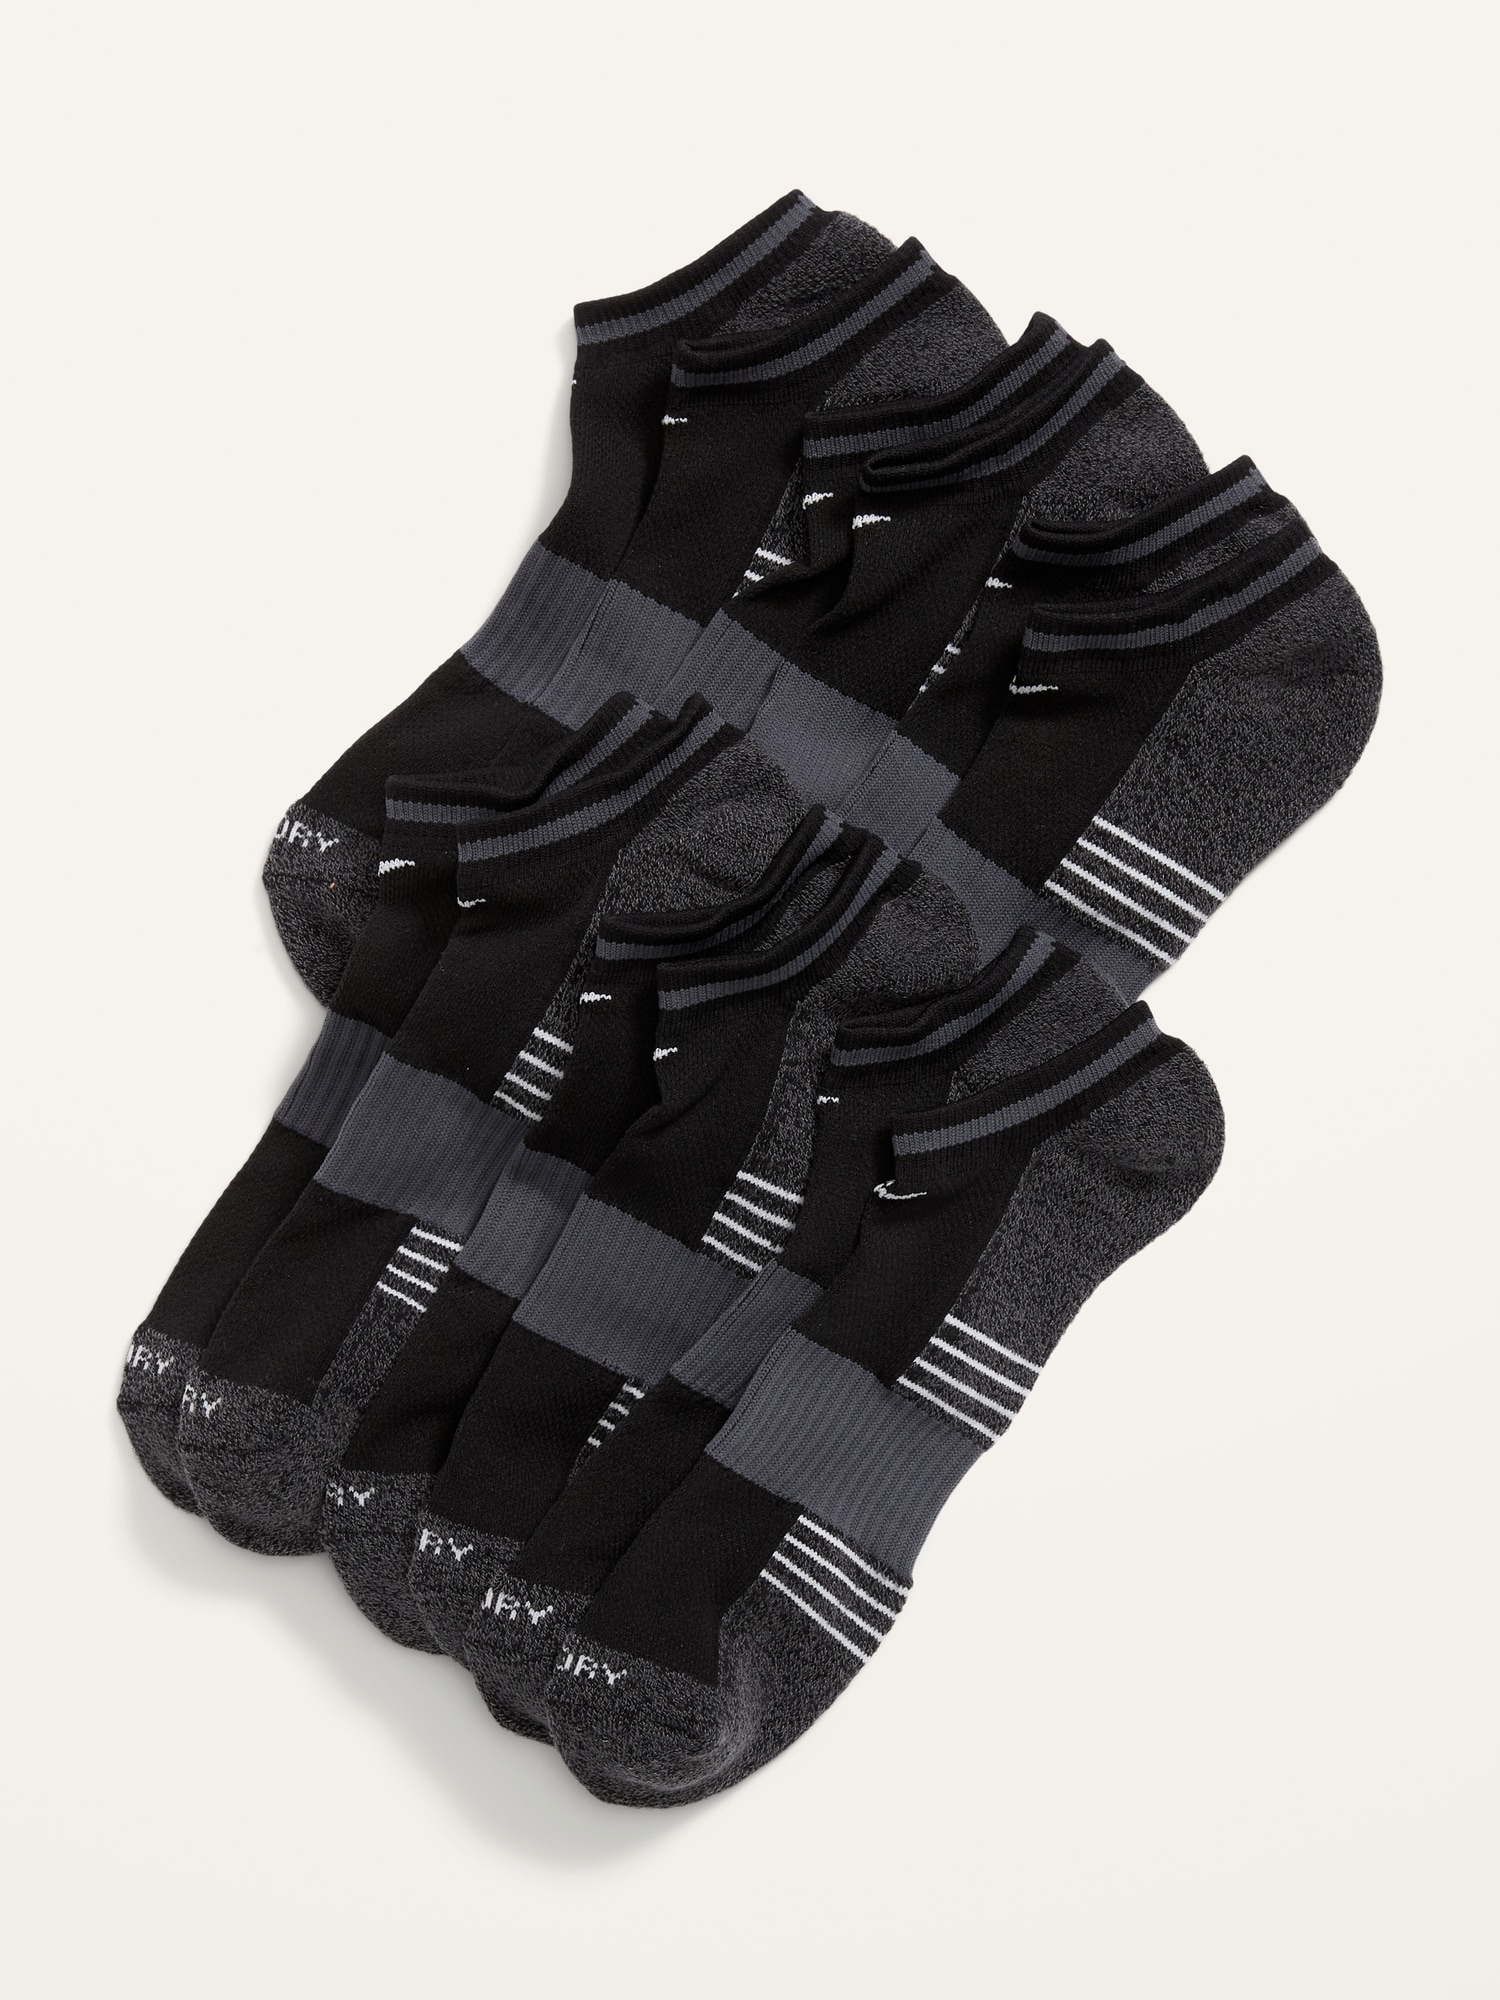 Old Navy Go-Dry Gender-Neutral Low-Cut Performance Socks 6-Pack for Adults black. 1